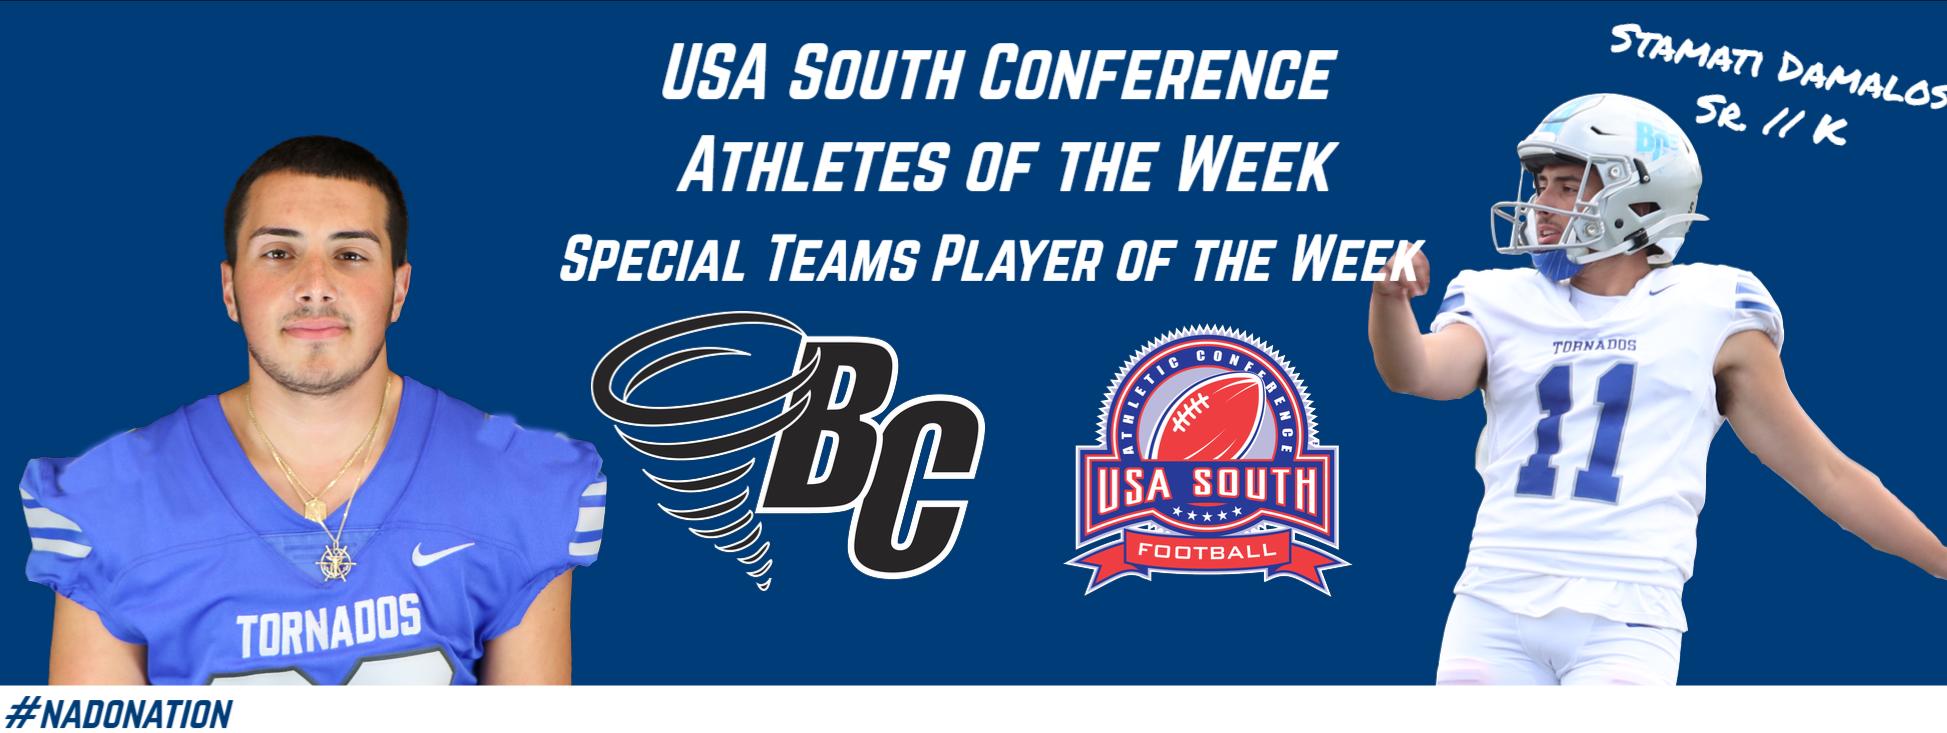 Damalos Named Conference’s Special Teams Player of the Week